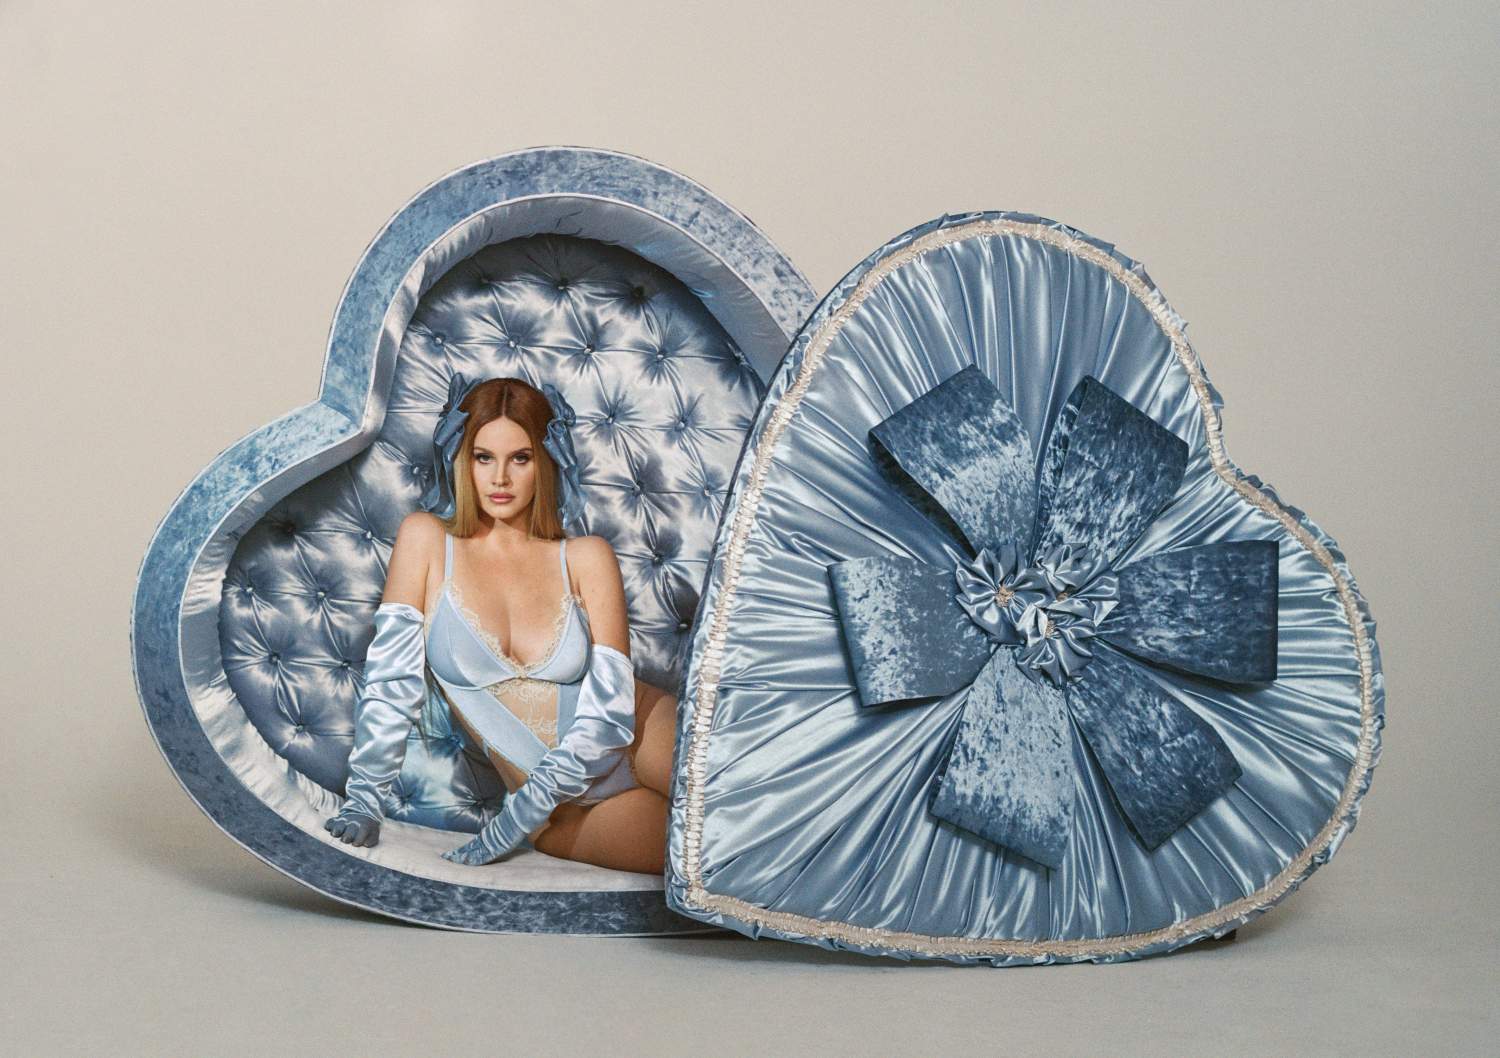 Lana Del Ray Fronts SKIMS’ Valentine’s Day Campaign